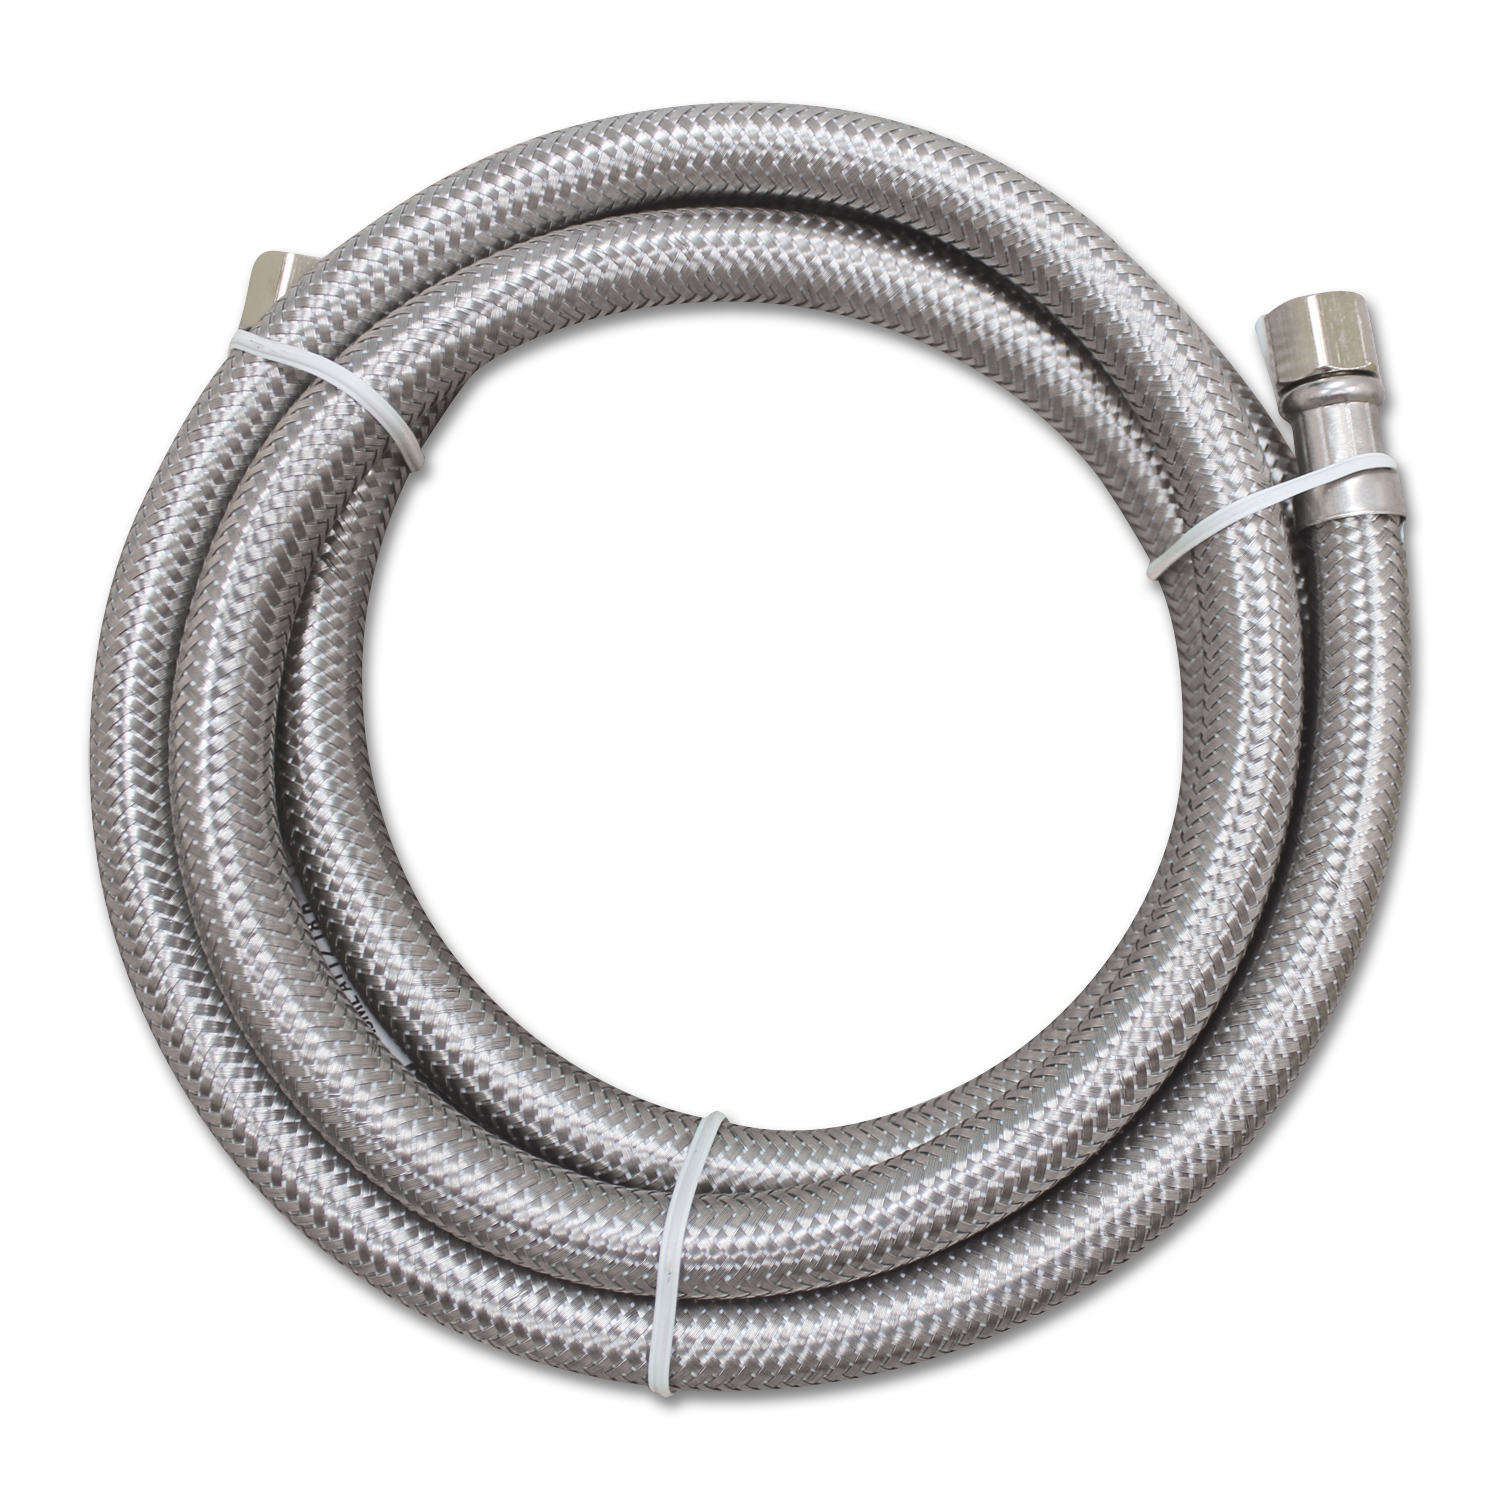 Chadwell Supply. 60 STAINLESS STEEL ICE MAKER SUPPLY LINE